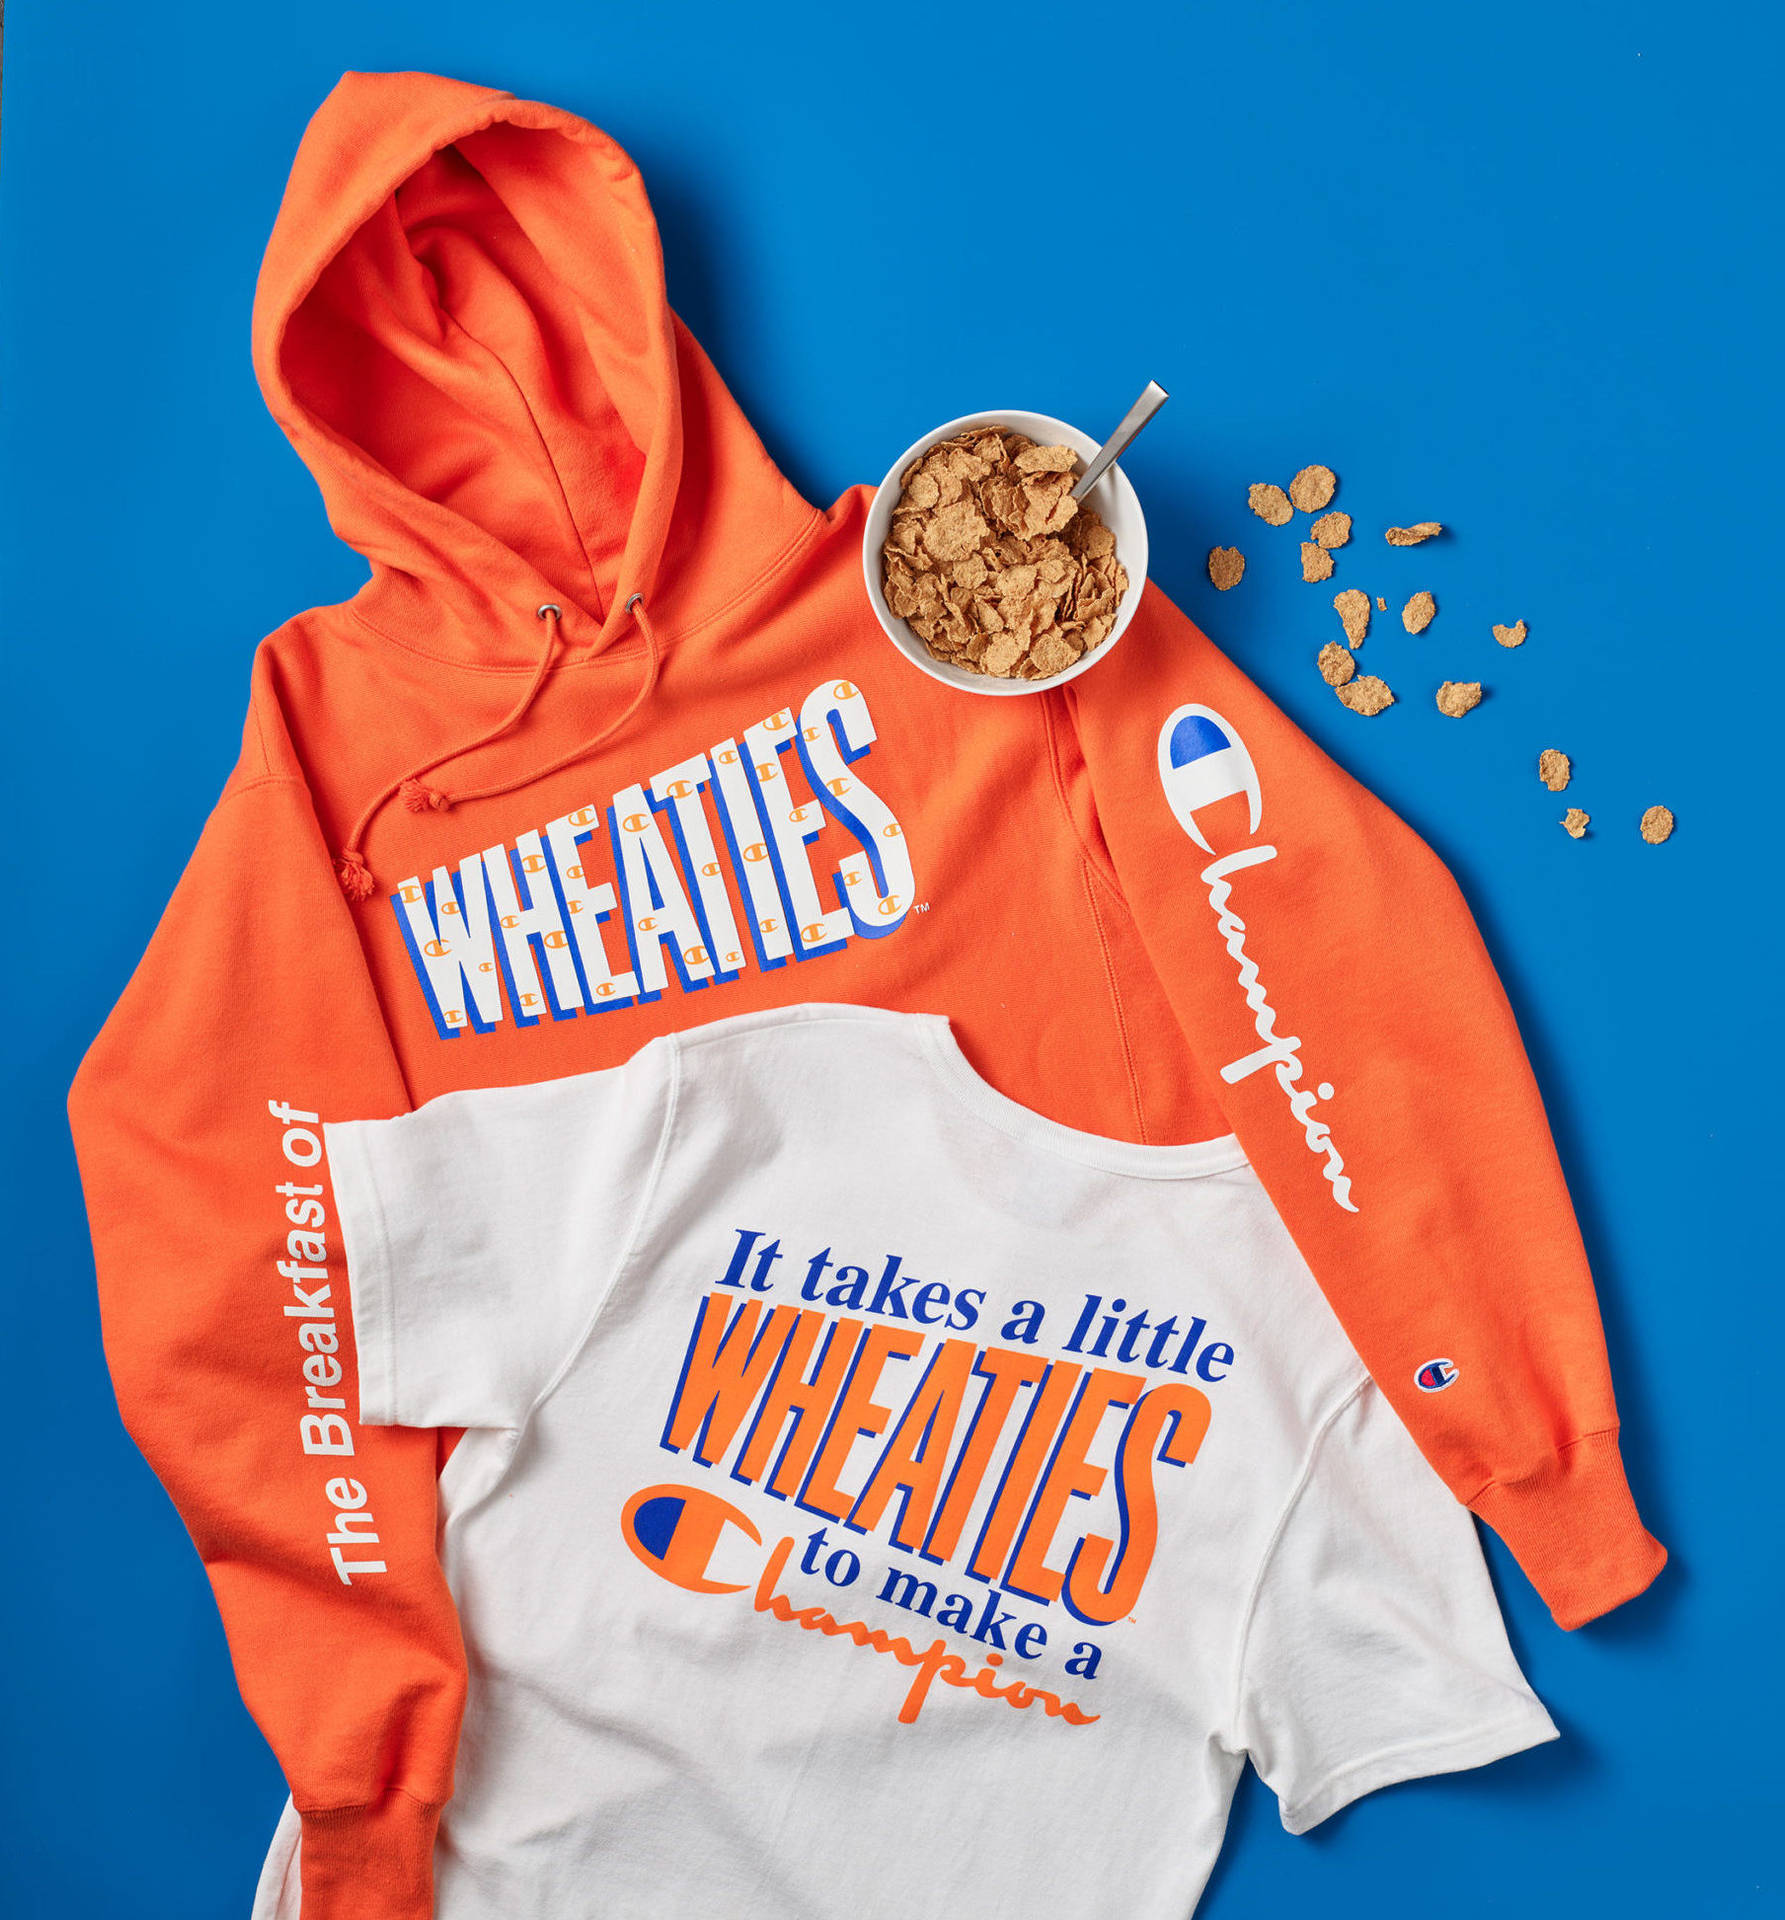 Champion And Wheaties Collaboration Background